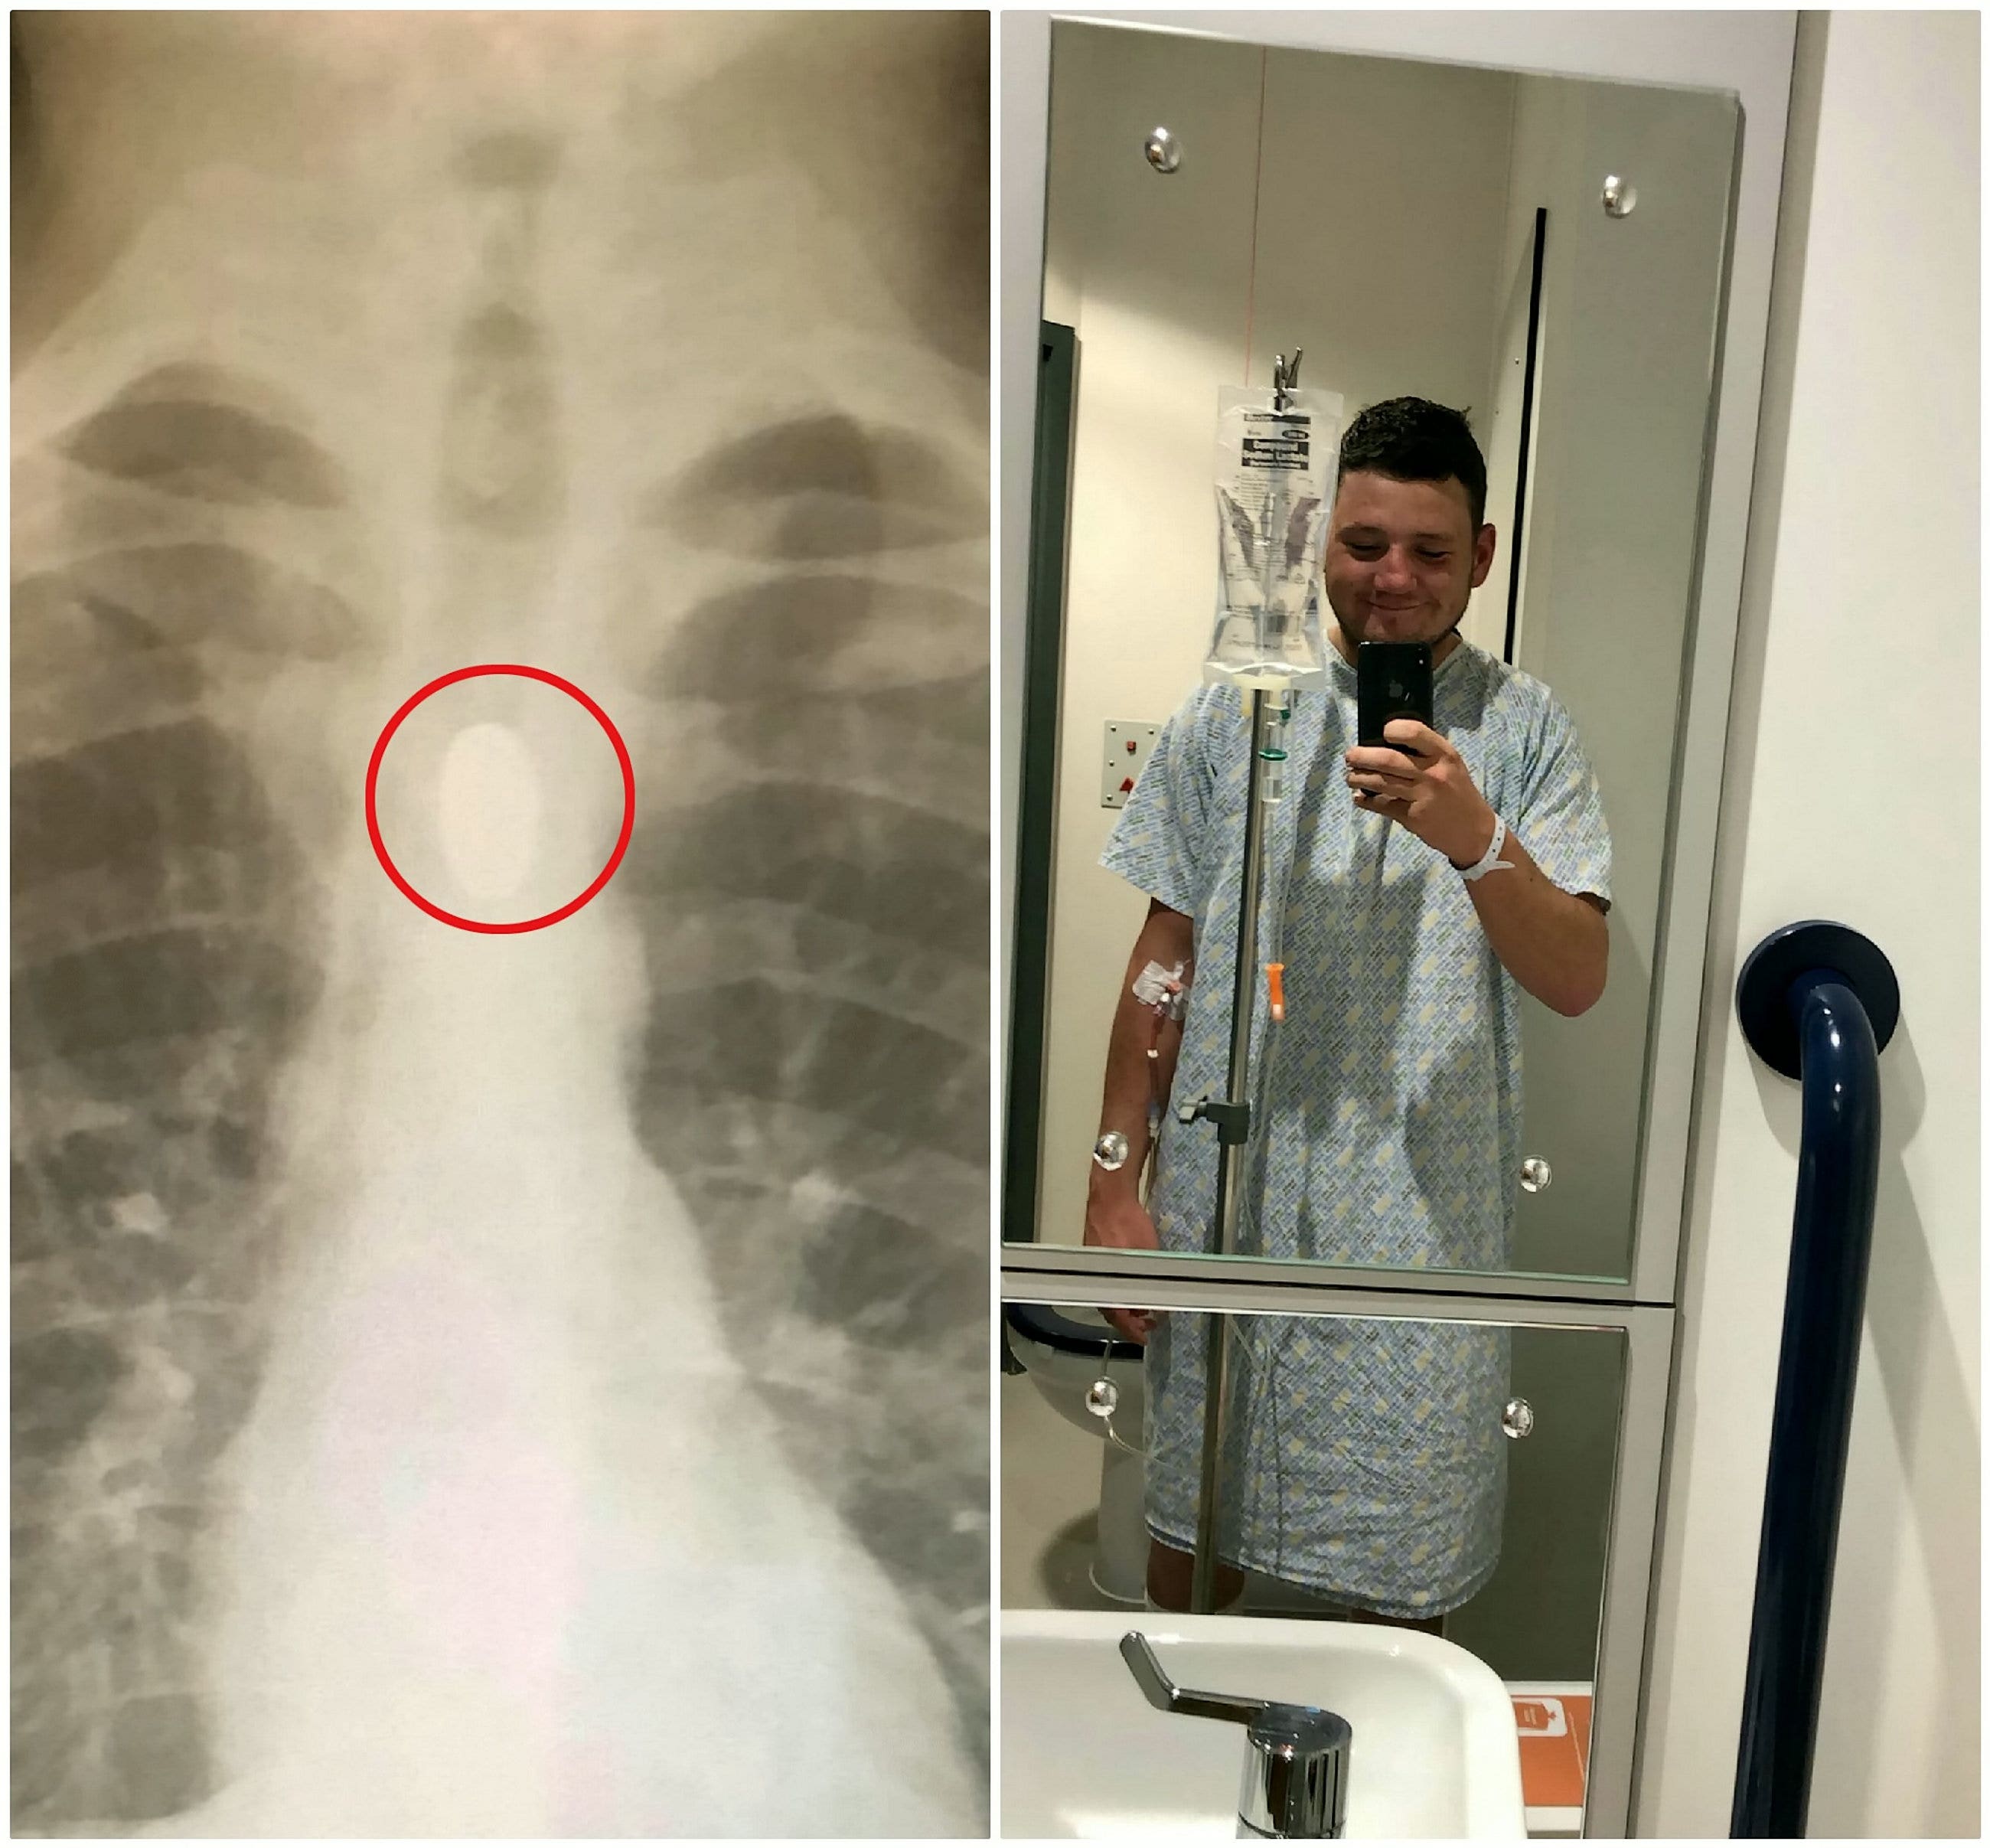 Man who landed in hospital after swallowing coin at party swears off stunt: 'Dad thinks I'm an idiot' - Fox News thumbnail